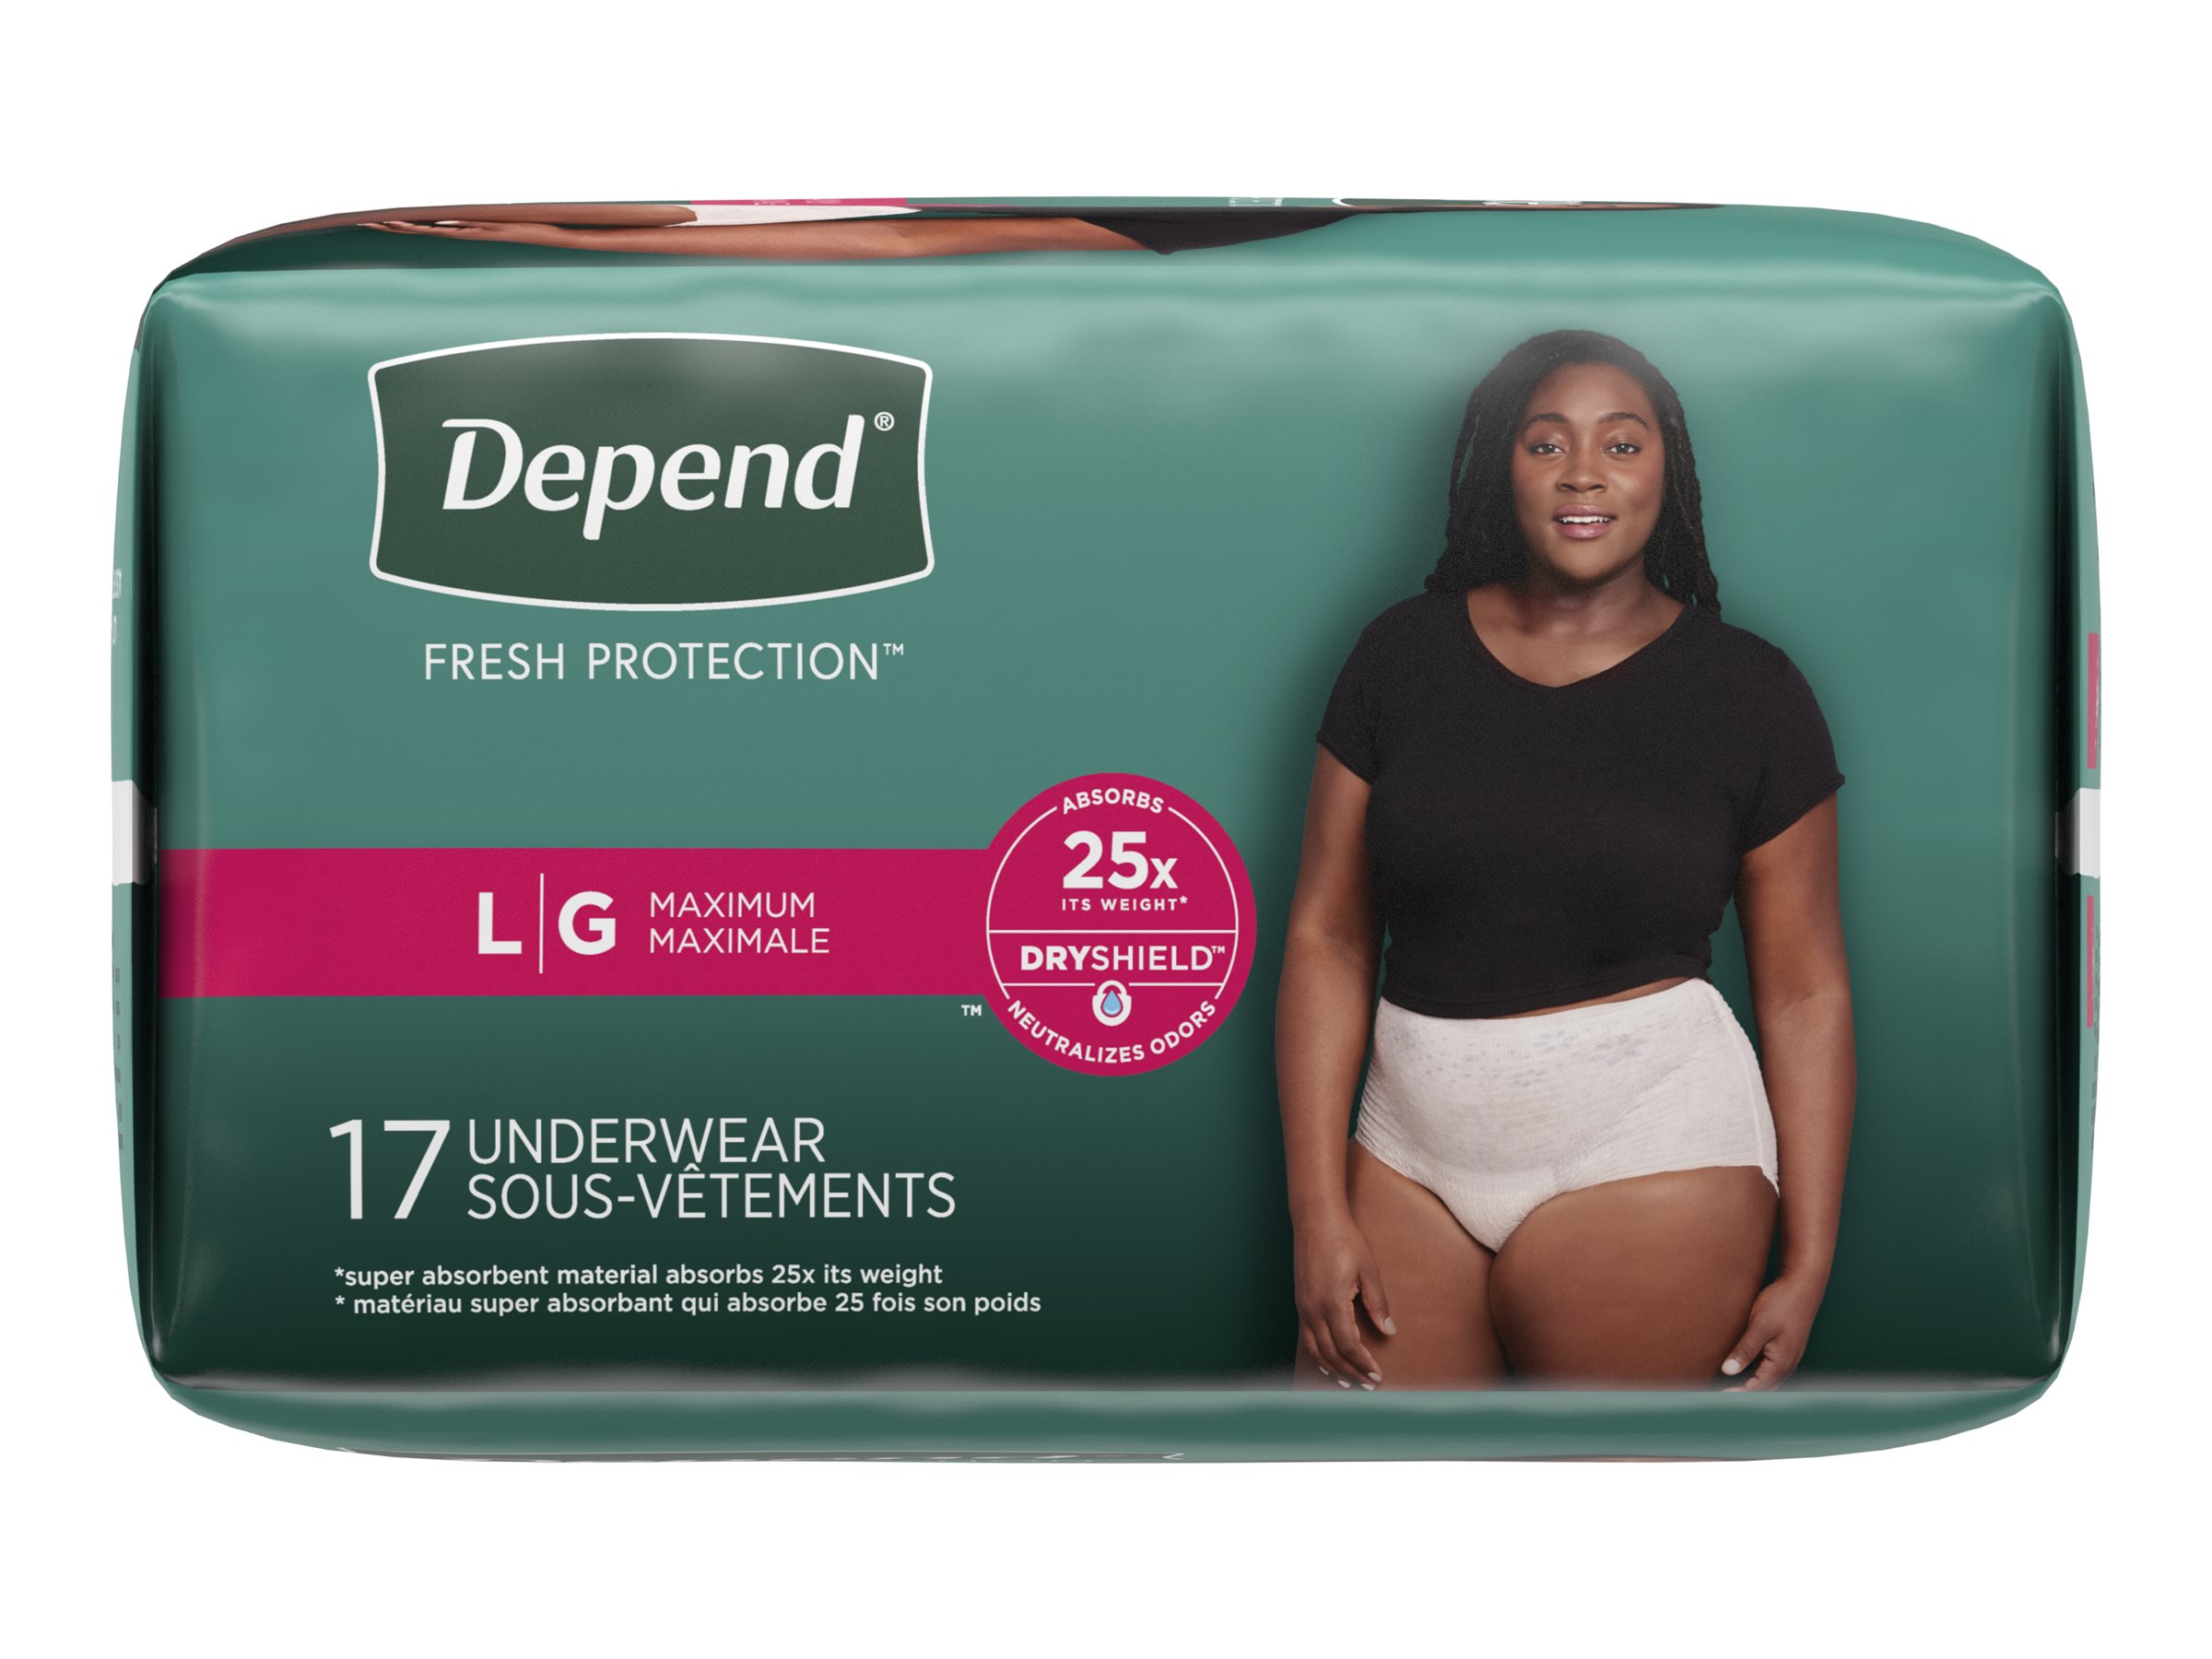  Depend Protection with Tabs, [Large], Maximum Absorbency,  16-Count Package : Health & Household